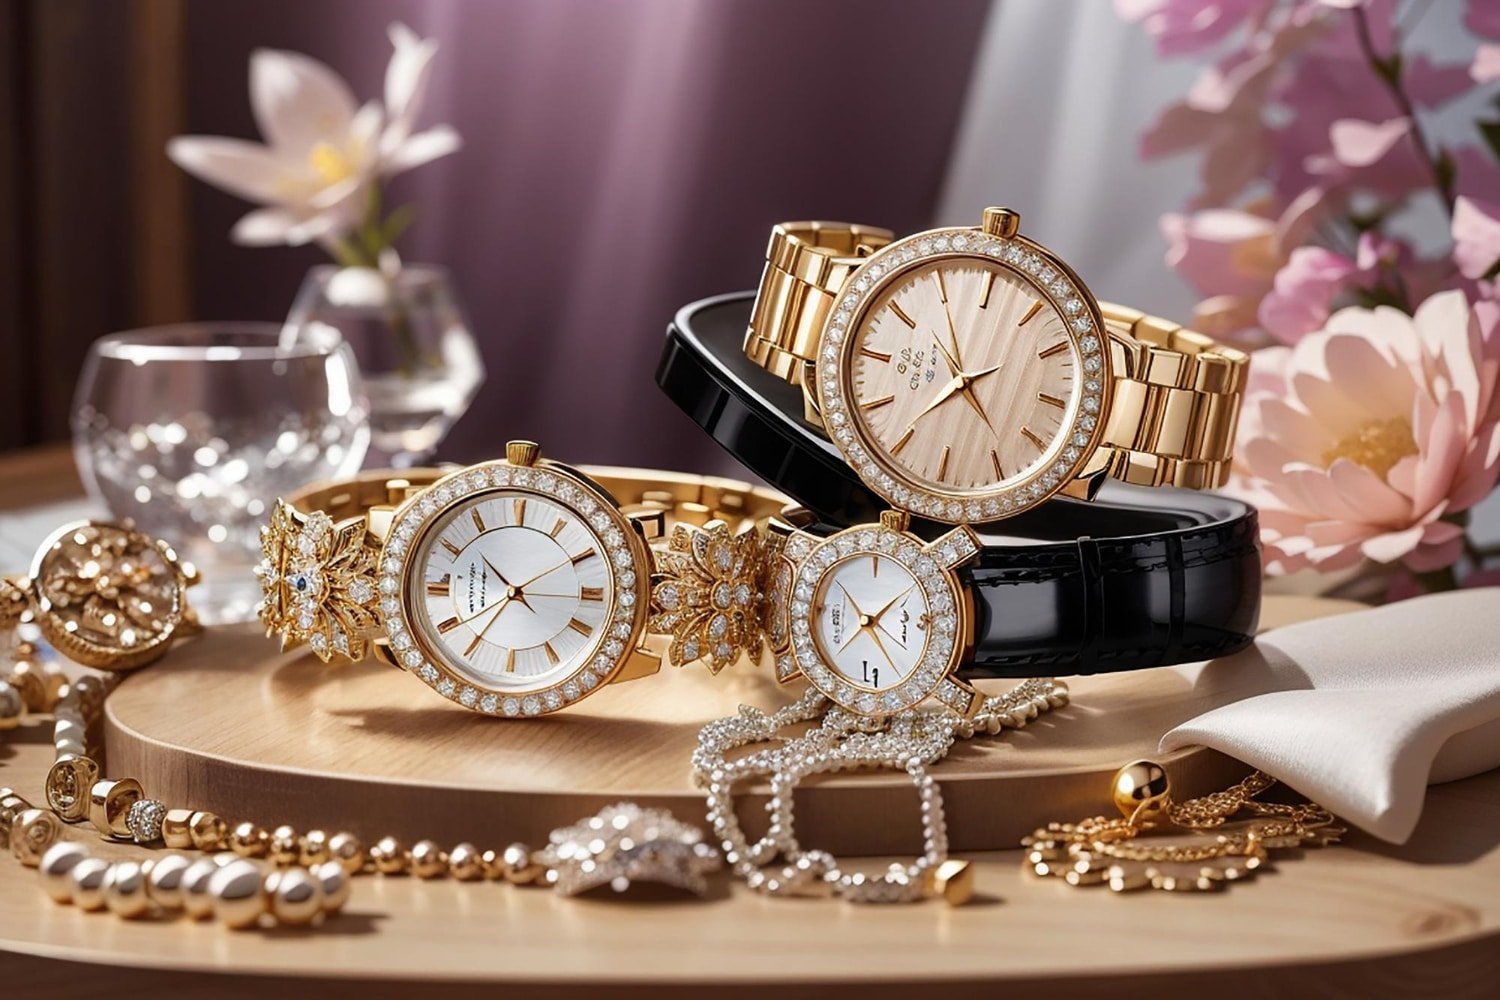 Celebrate Special Occasions With Fields’s Exquisite Jewelry And Watches